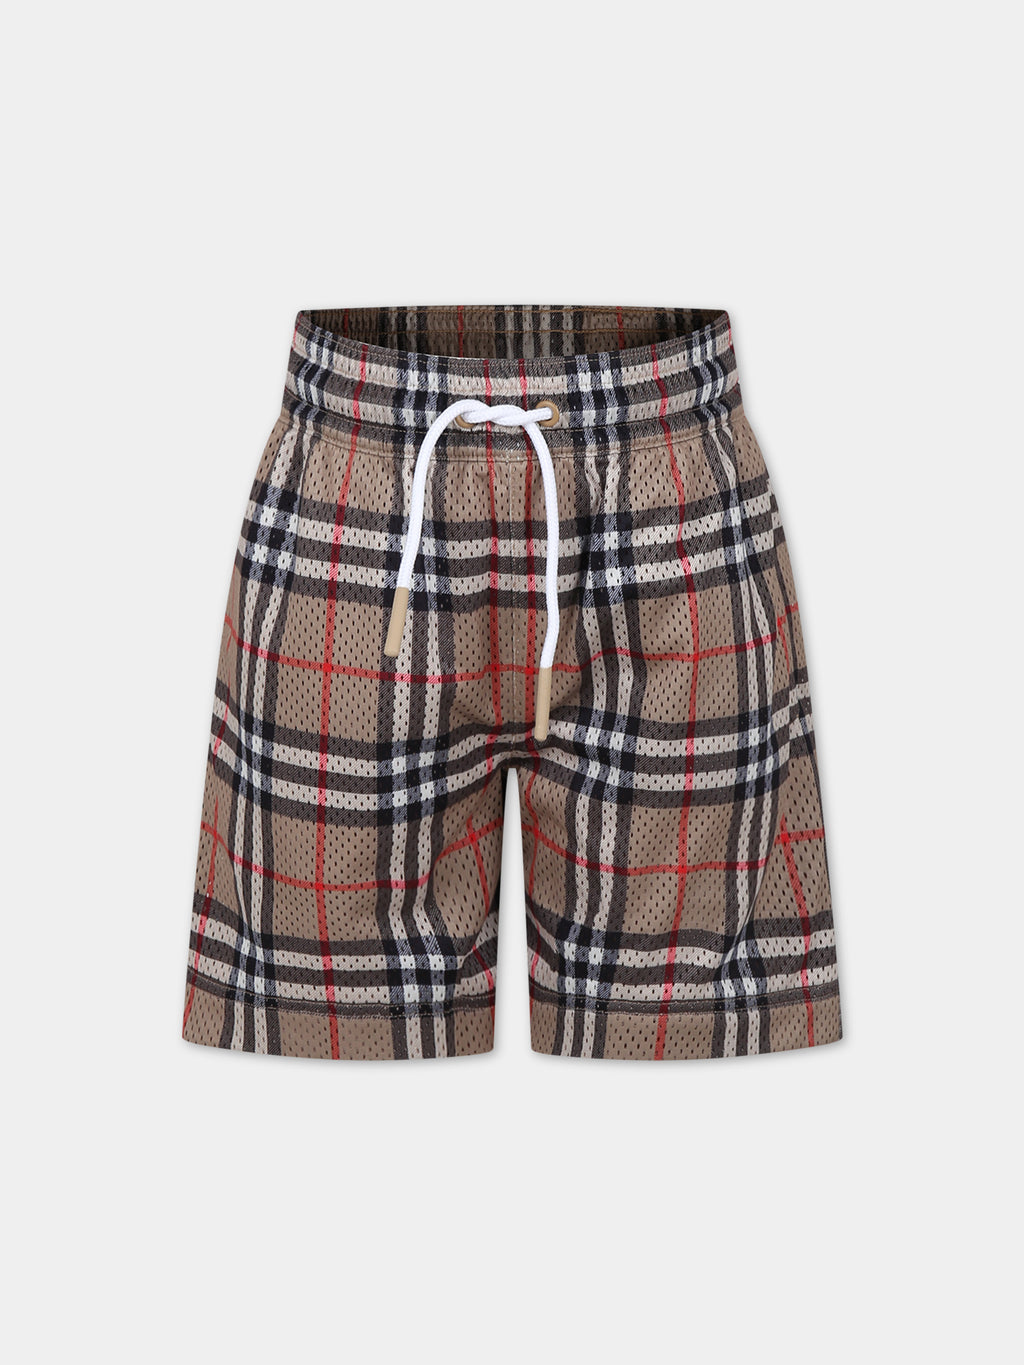 Beige sports shorts for boy with iconic vintage check